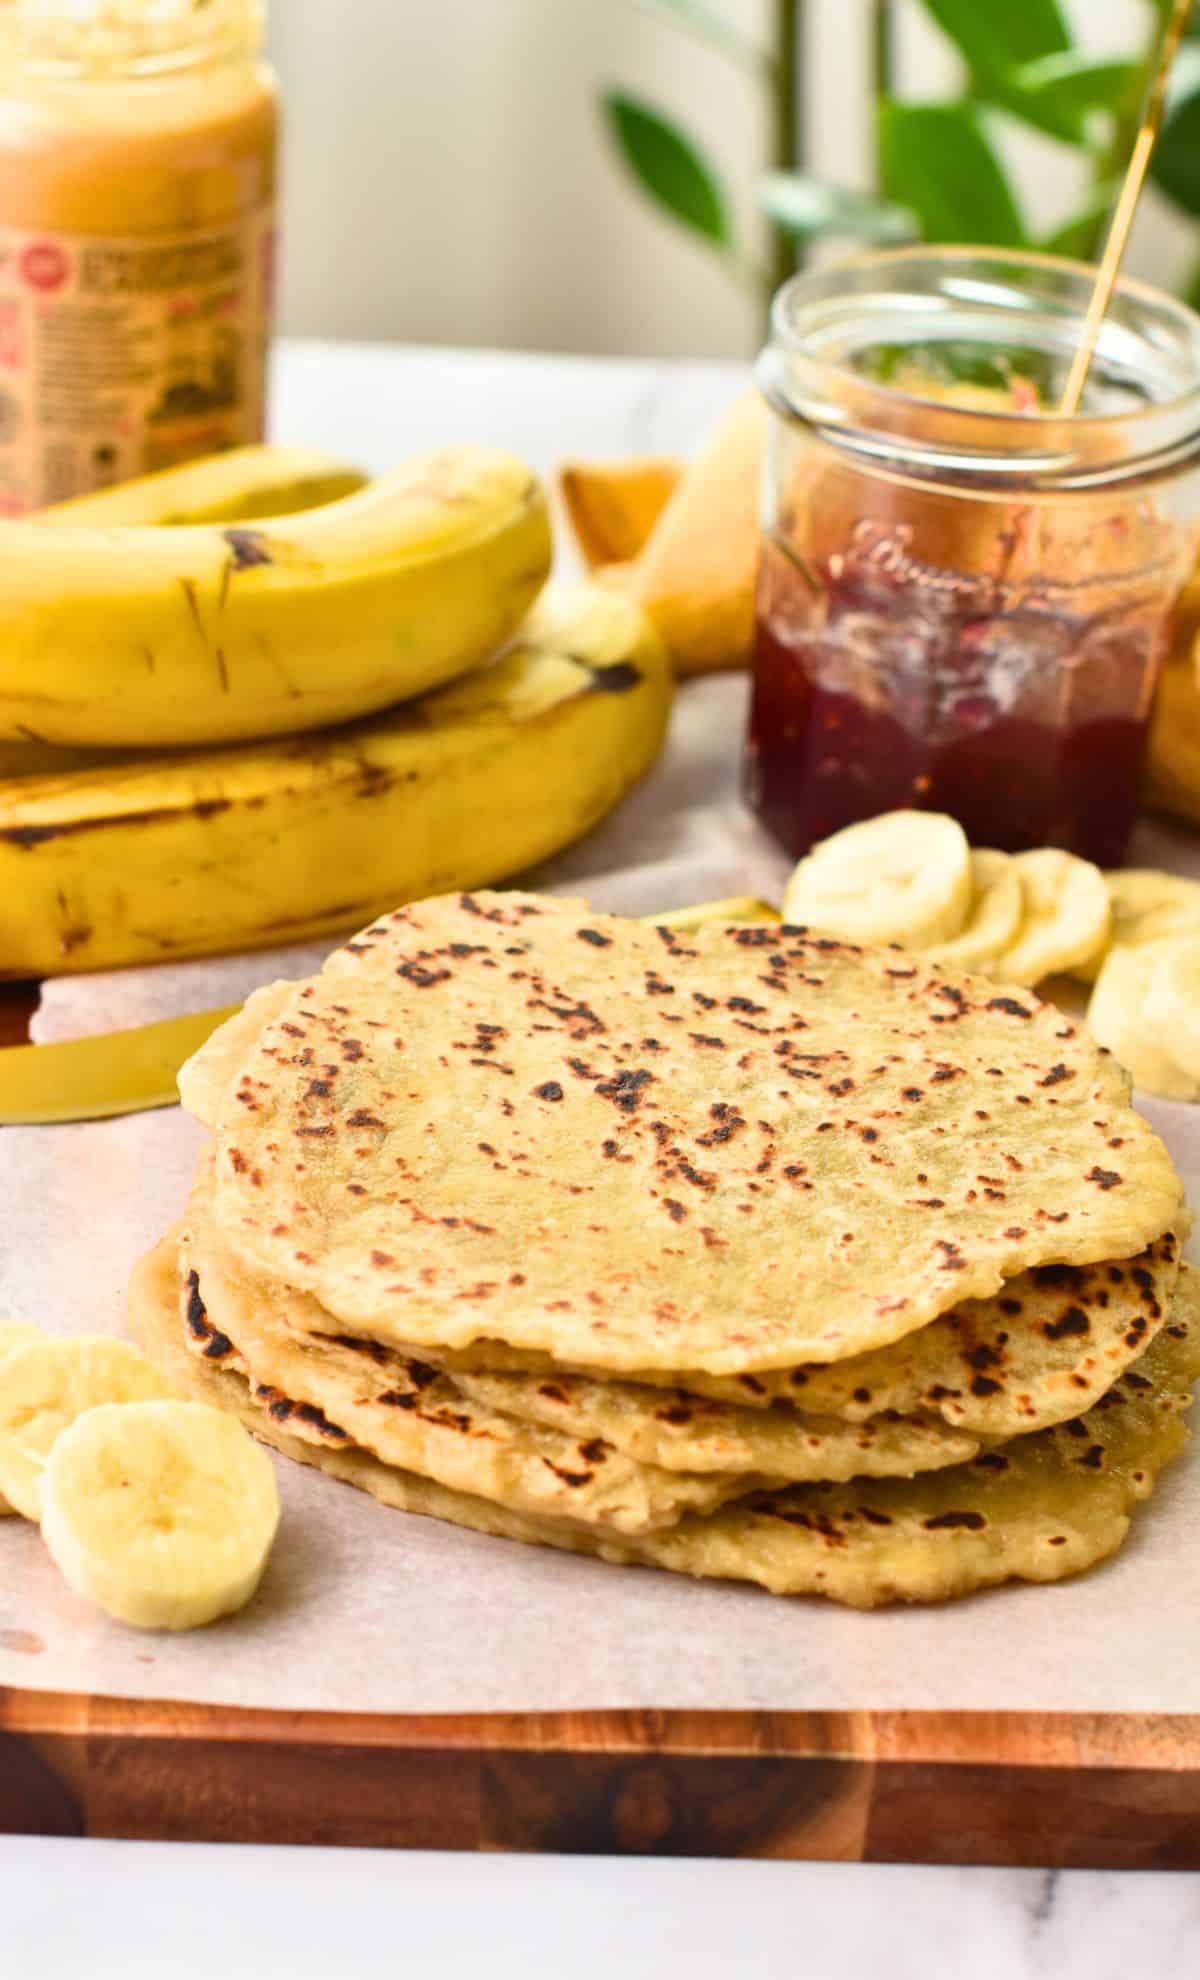 Banana Tortillas stacked on a wooden board with toppings around it.